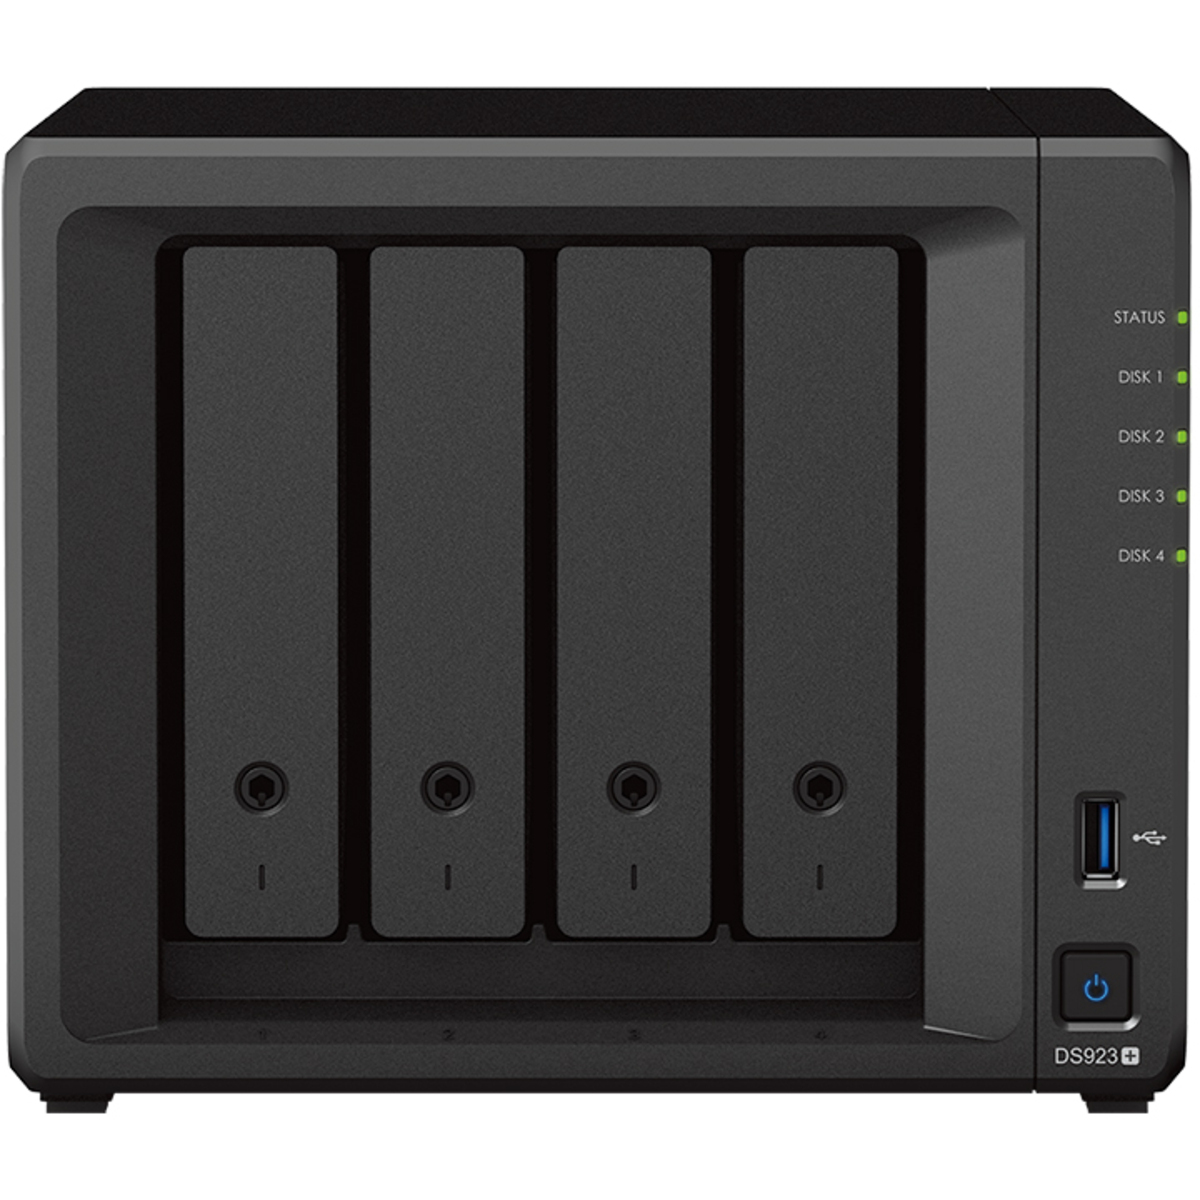 Synology DiskStation DS923+ 24tb 4-Bay Desktop Multimedia / Power User / Business NAS - Network Attached Storage Device 4x6tb Western Digital Red WD60EFAX 3.5 5400rpm SATA 6Gb/s HDD NAS Class Drives Installed - Burn-In Tested - FREE RAM UPGRADE DiskStation DS923+